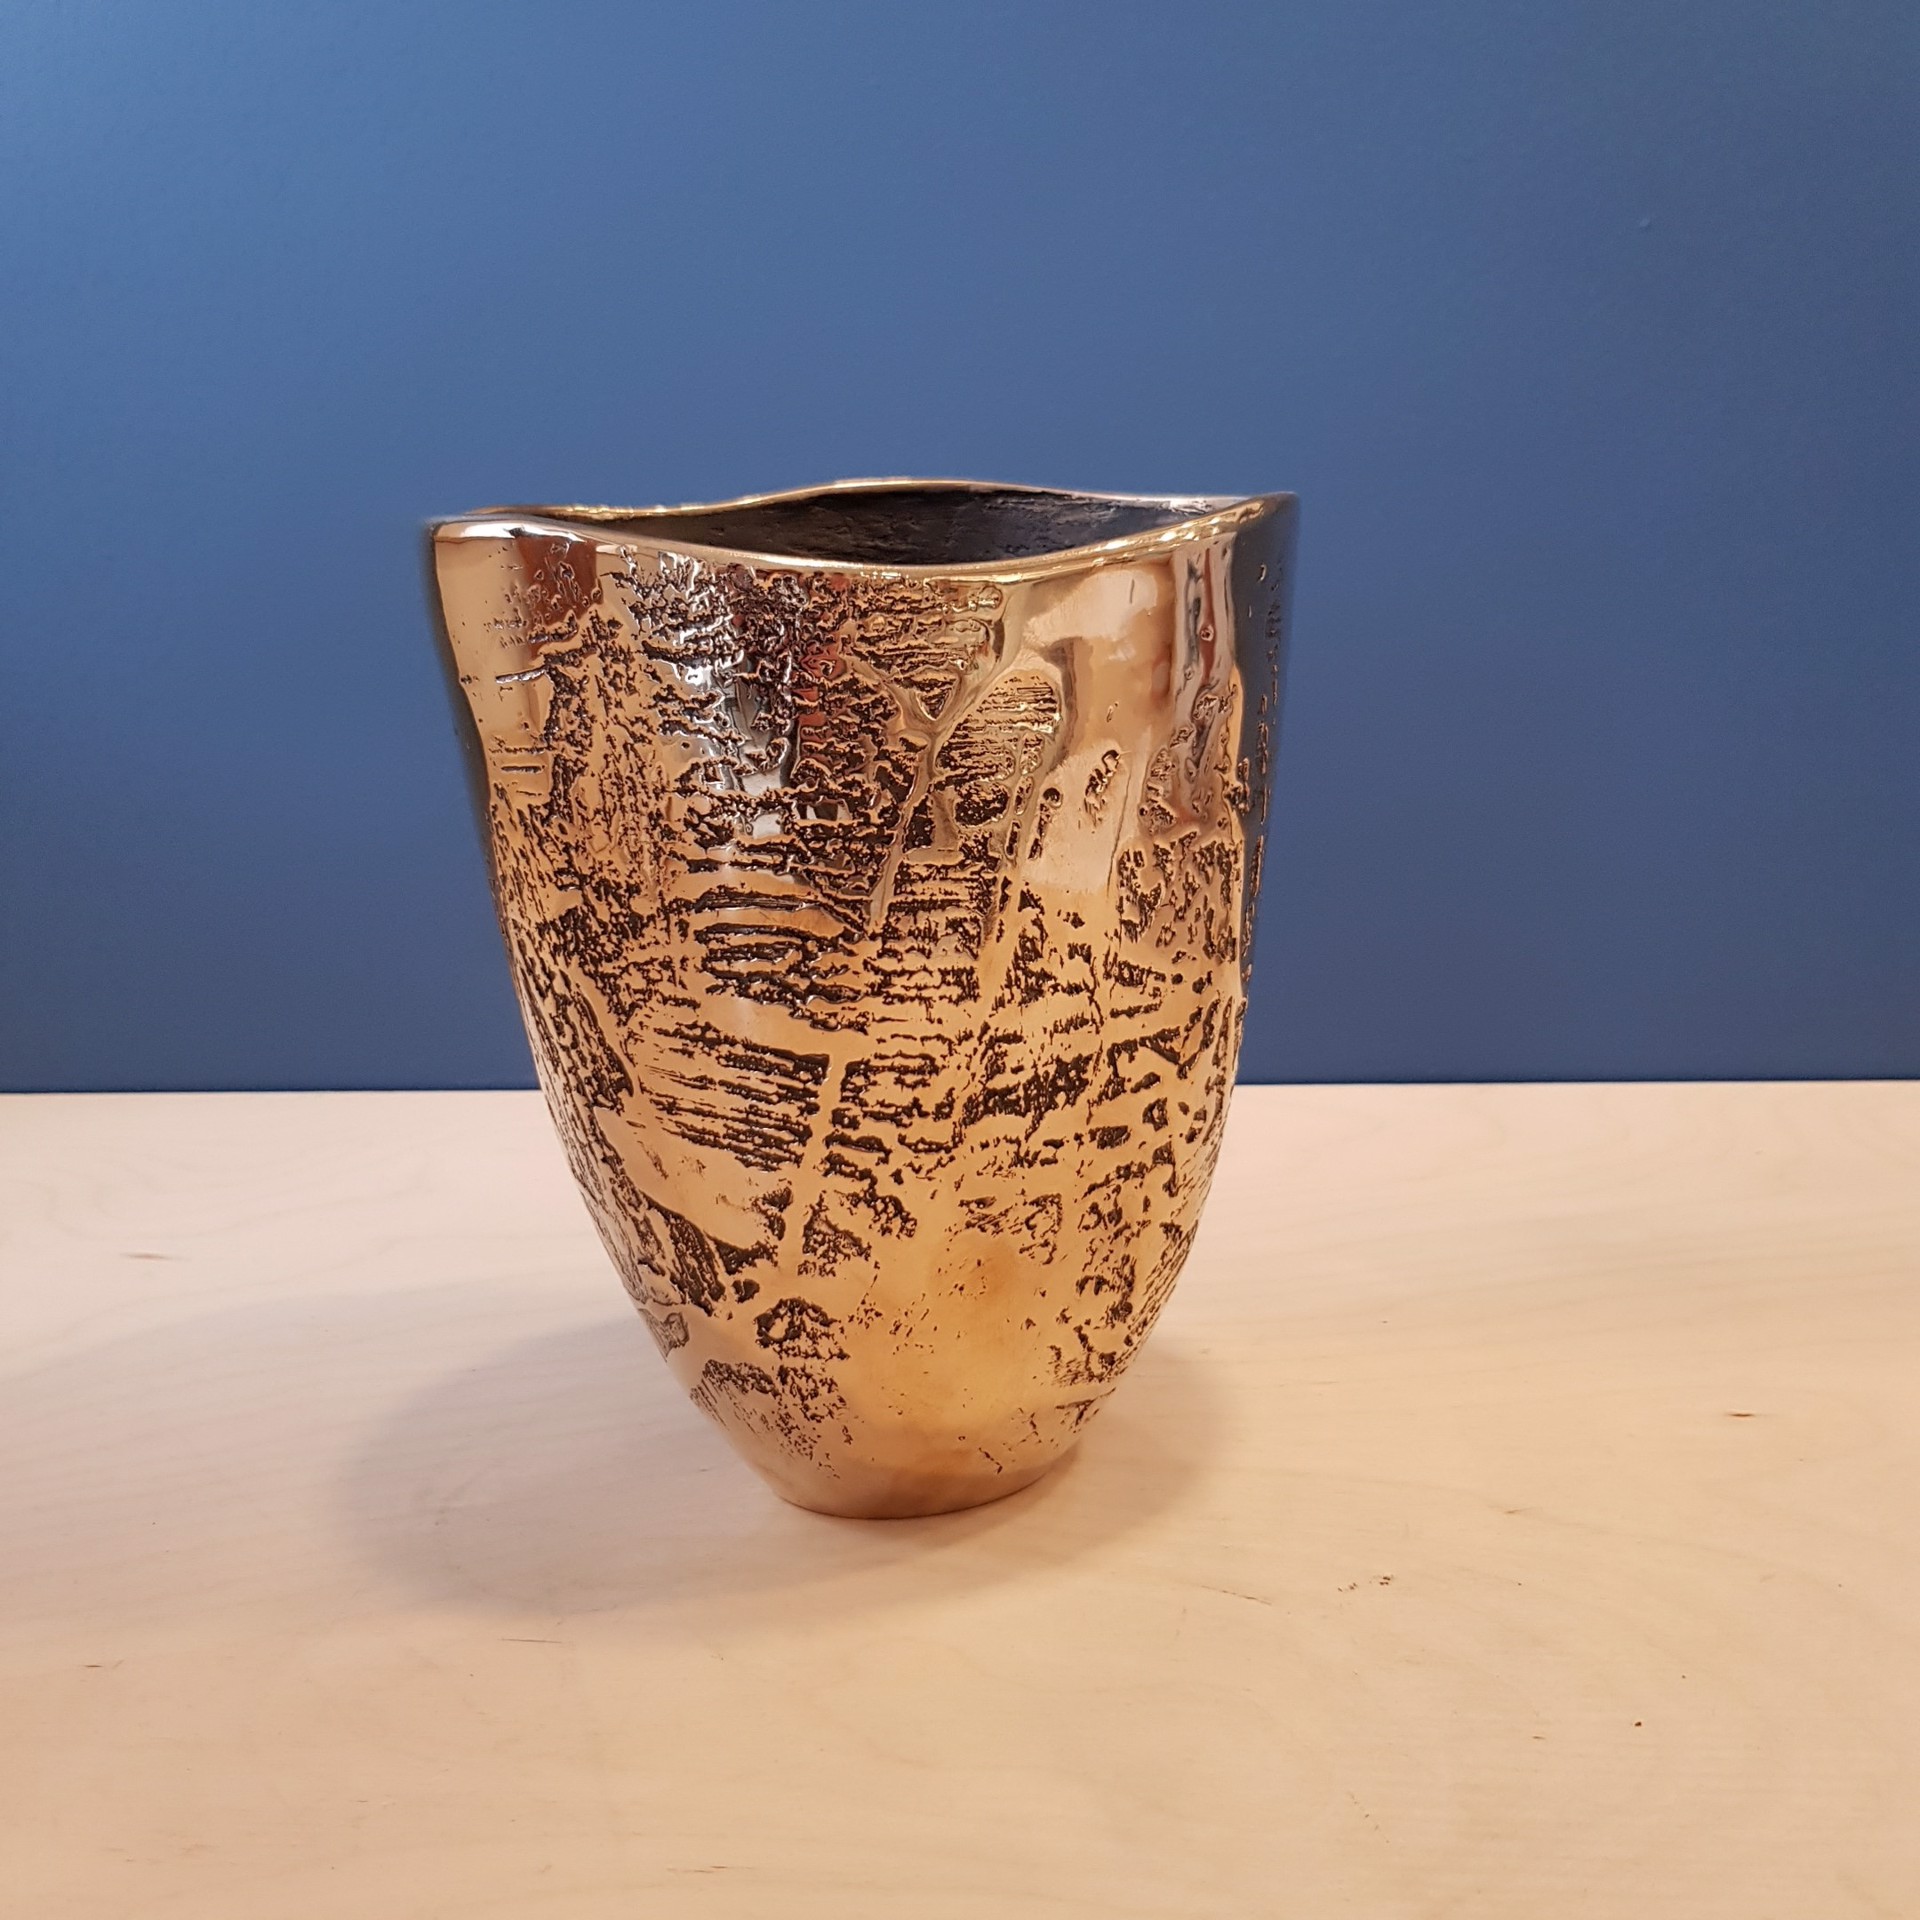 Open Form Bowl by Jack Eagan